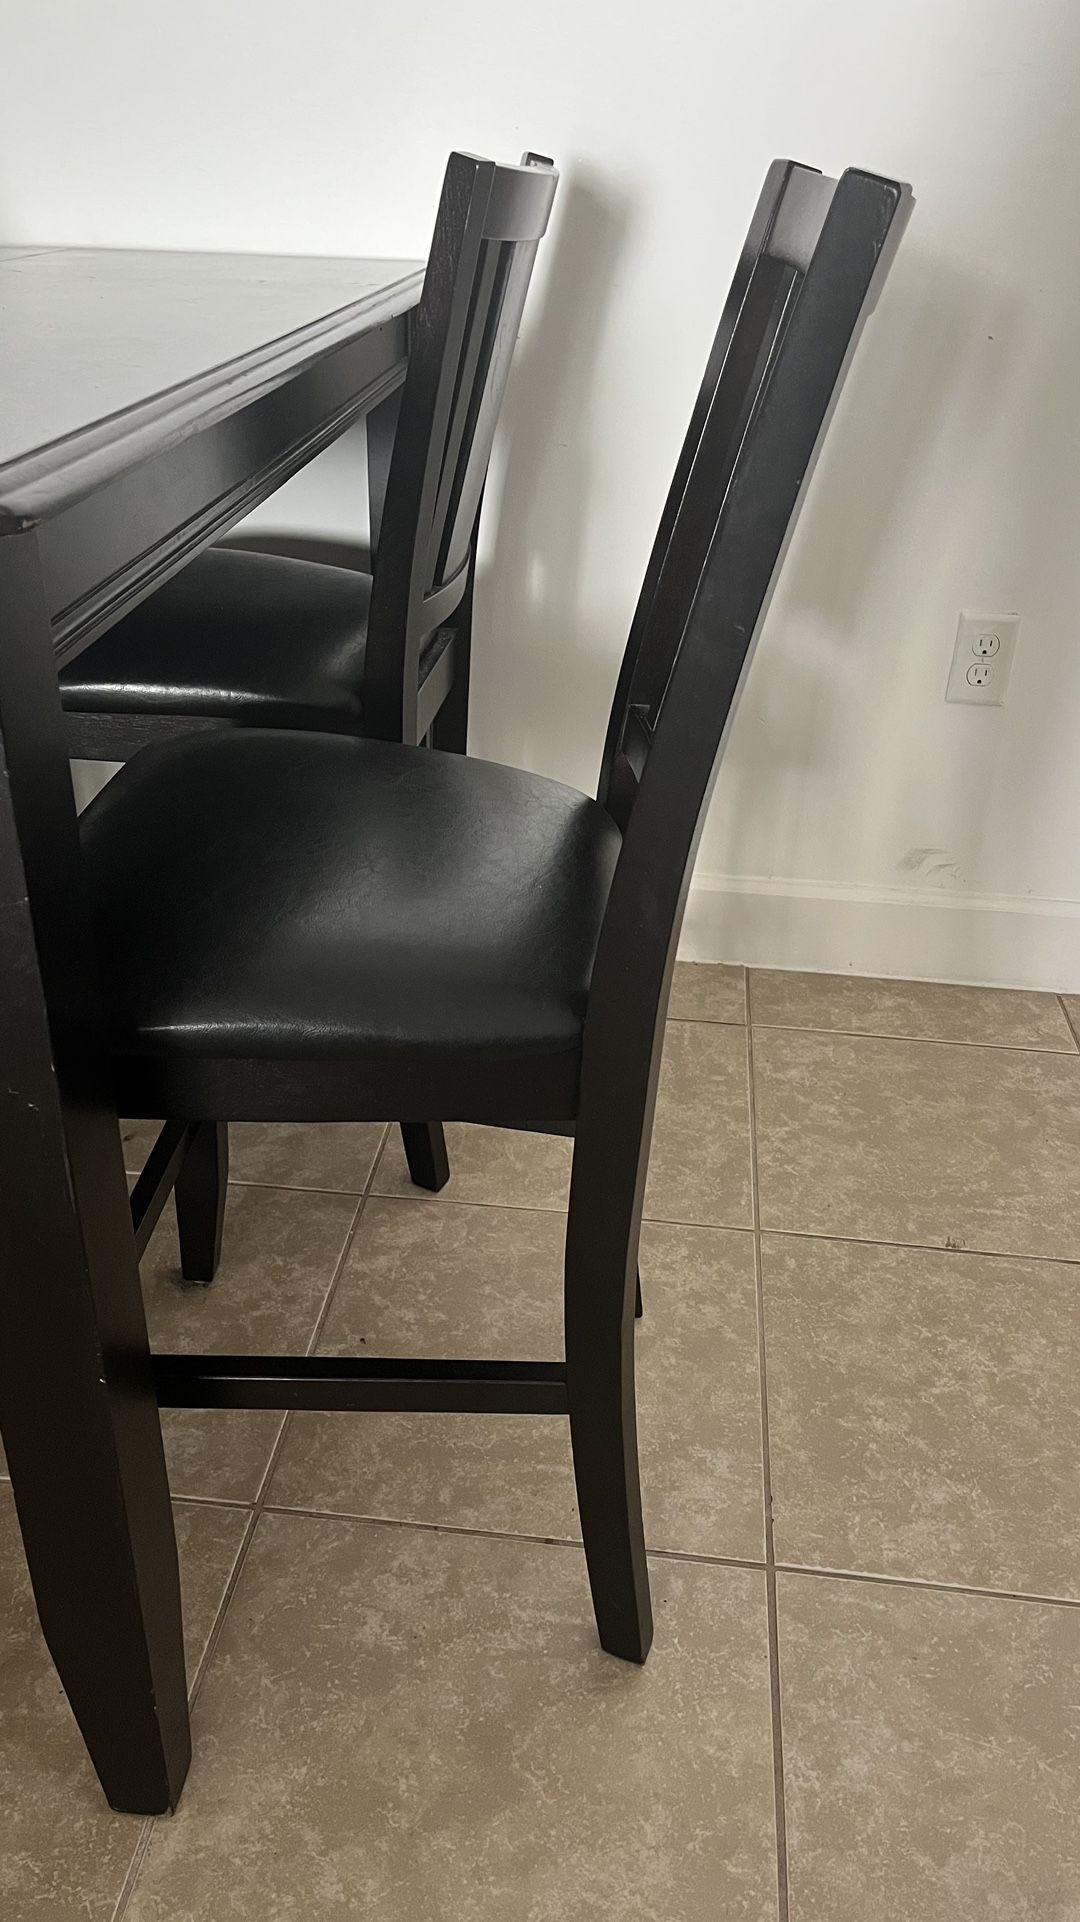 SALE- Kitchen table for only $100